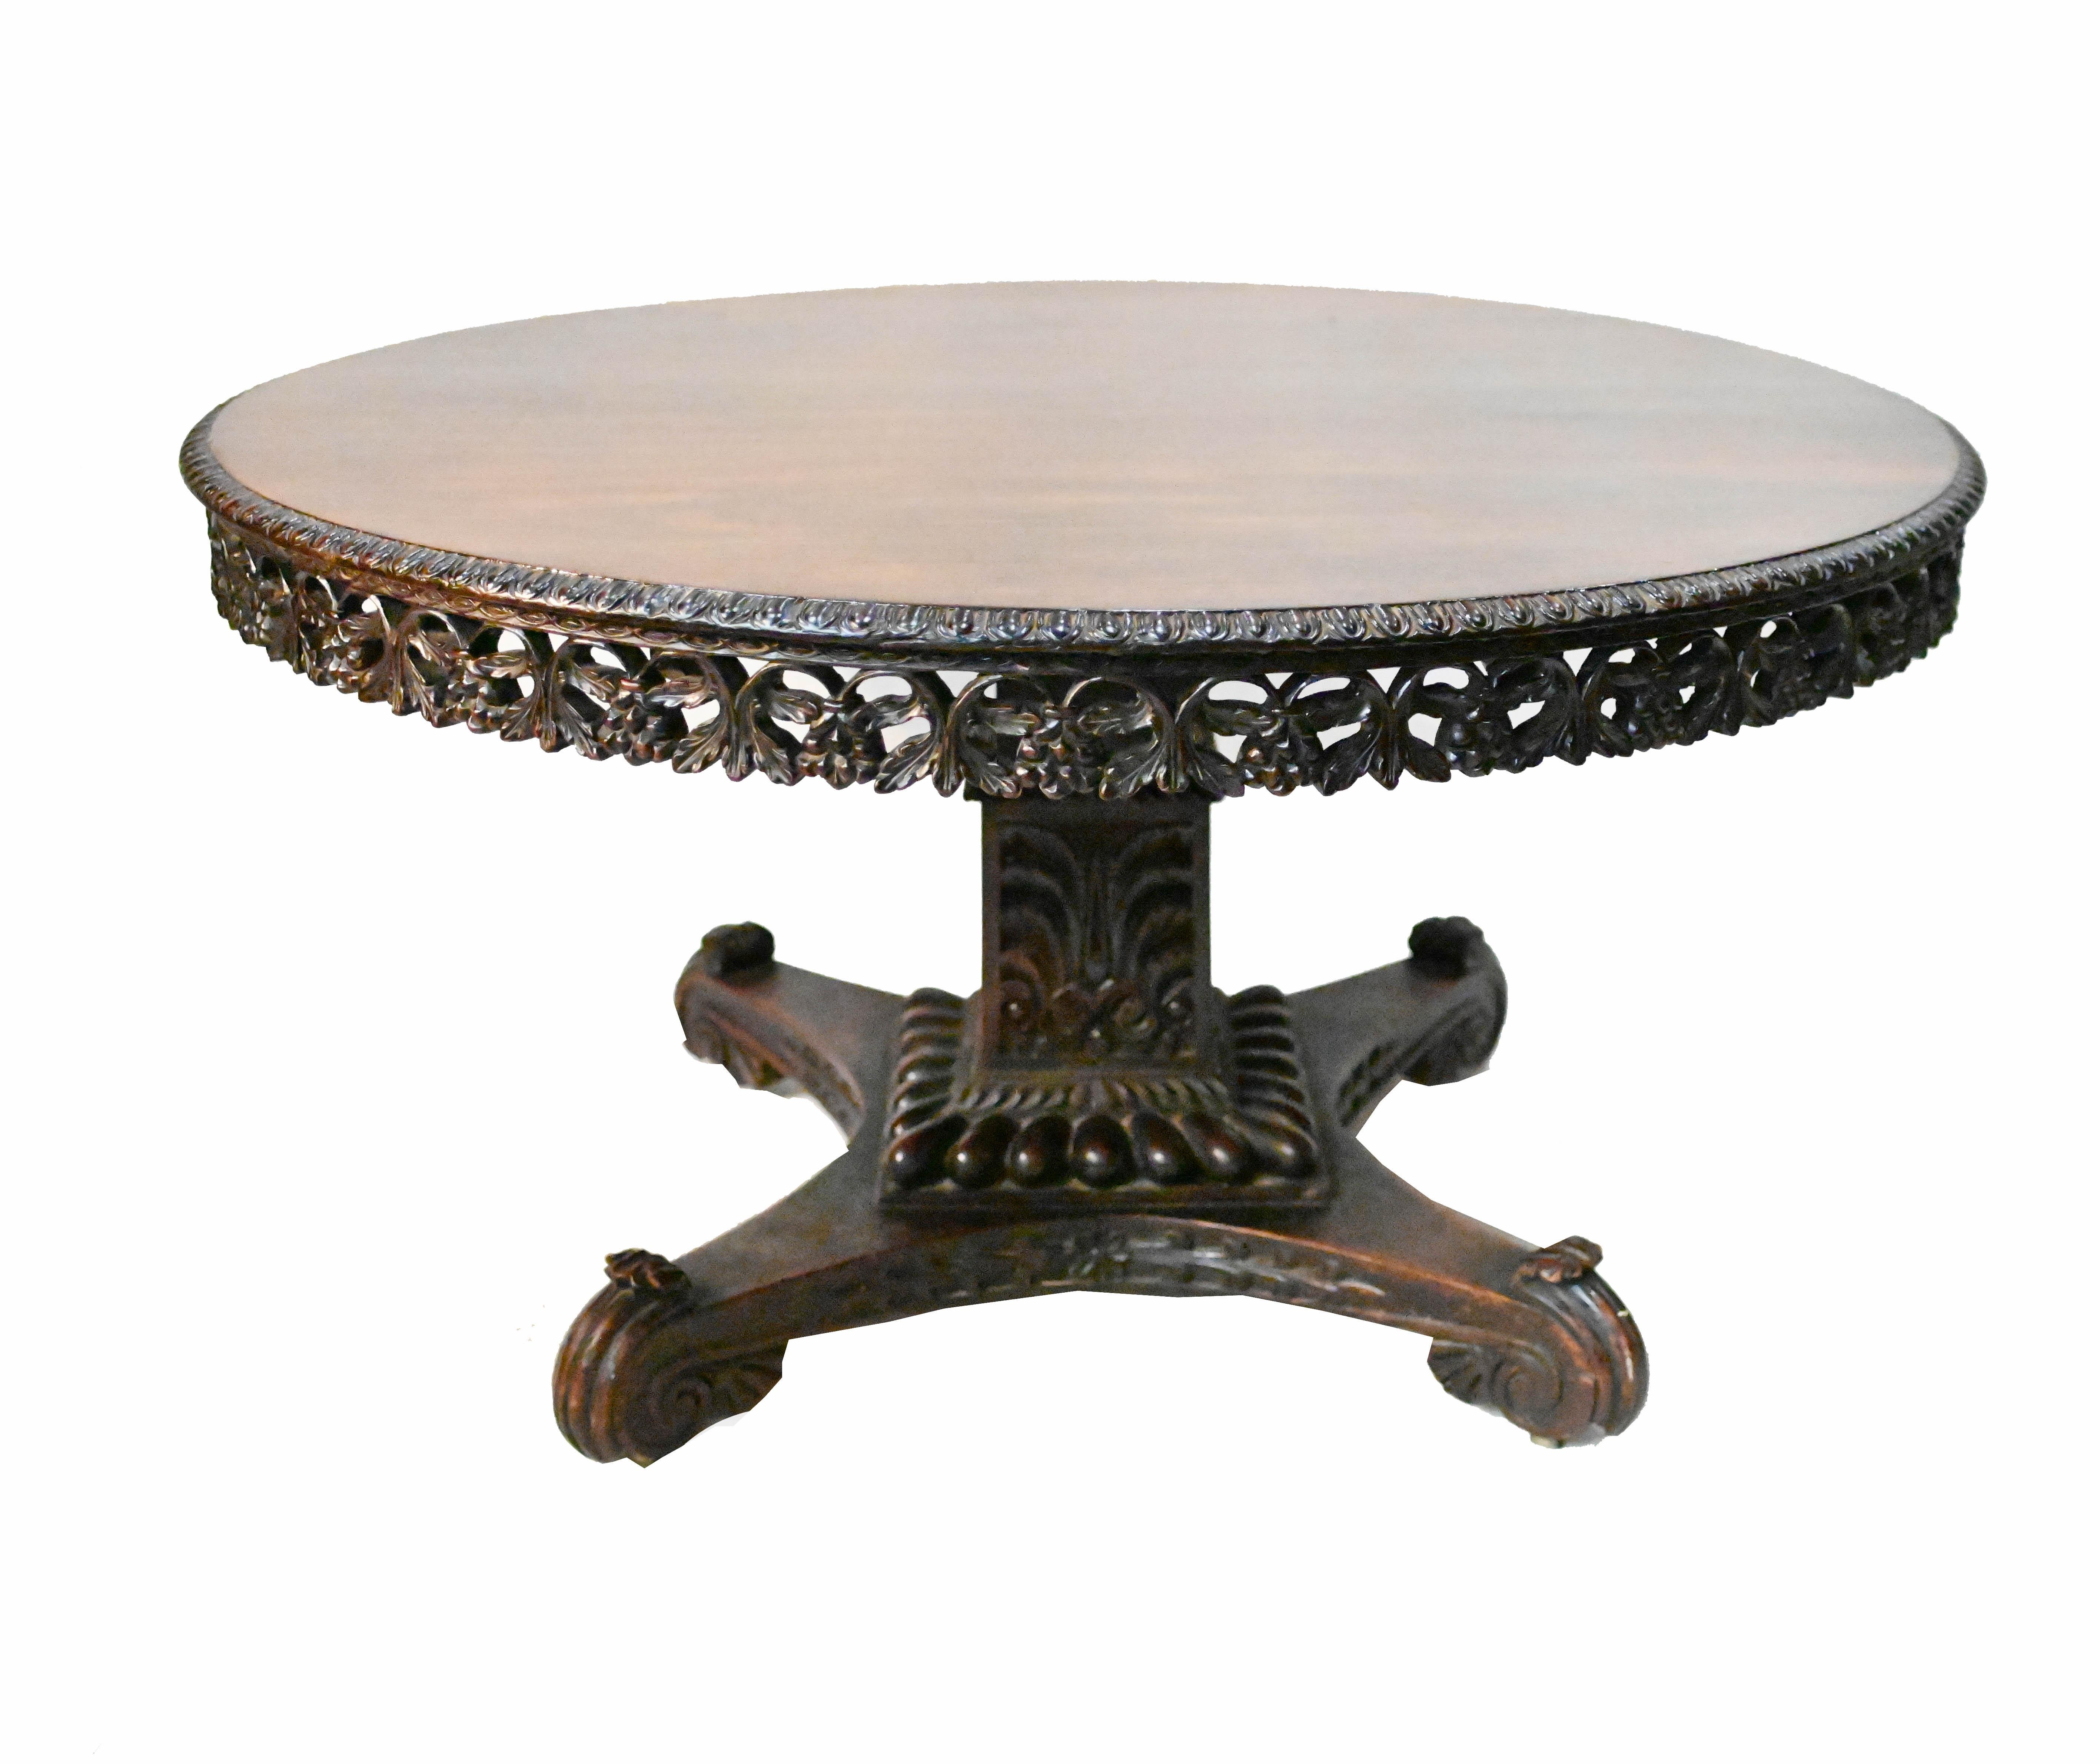 You are viewing a gorgeous Colonial - possibly Myanmar (Burmese) round dining table
Hand carved from padauk wood with intricate carving particularly on the frieze around the edge of the top
The legs and base also intricately hand carved with various